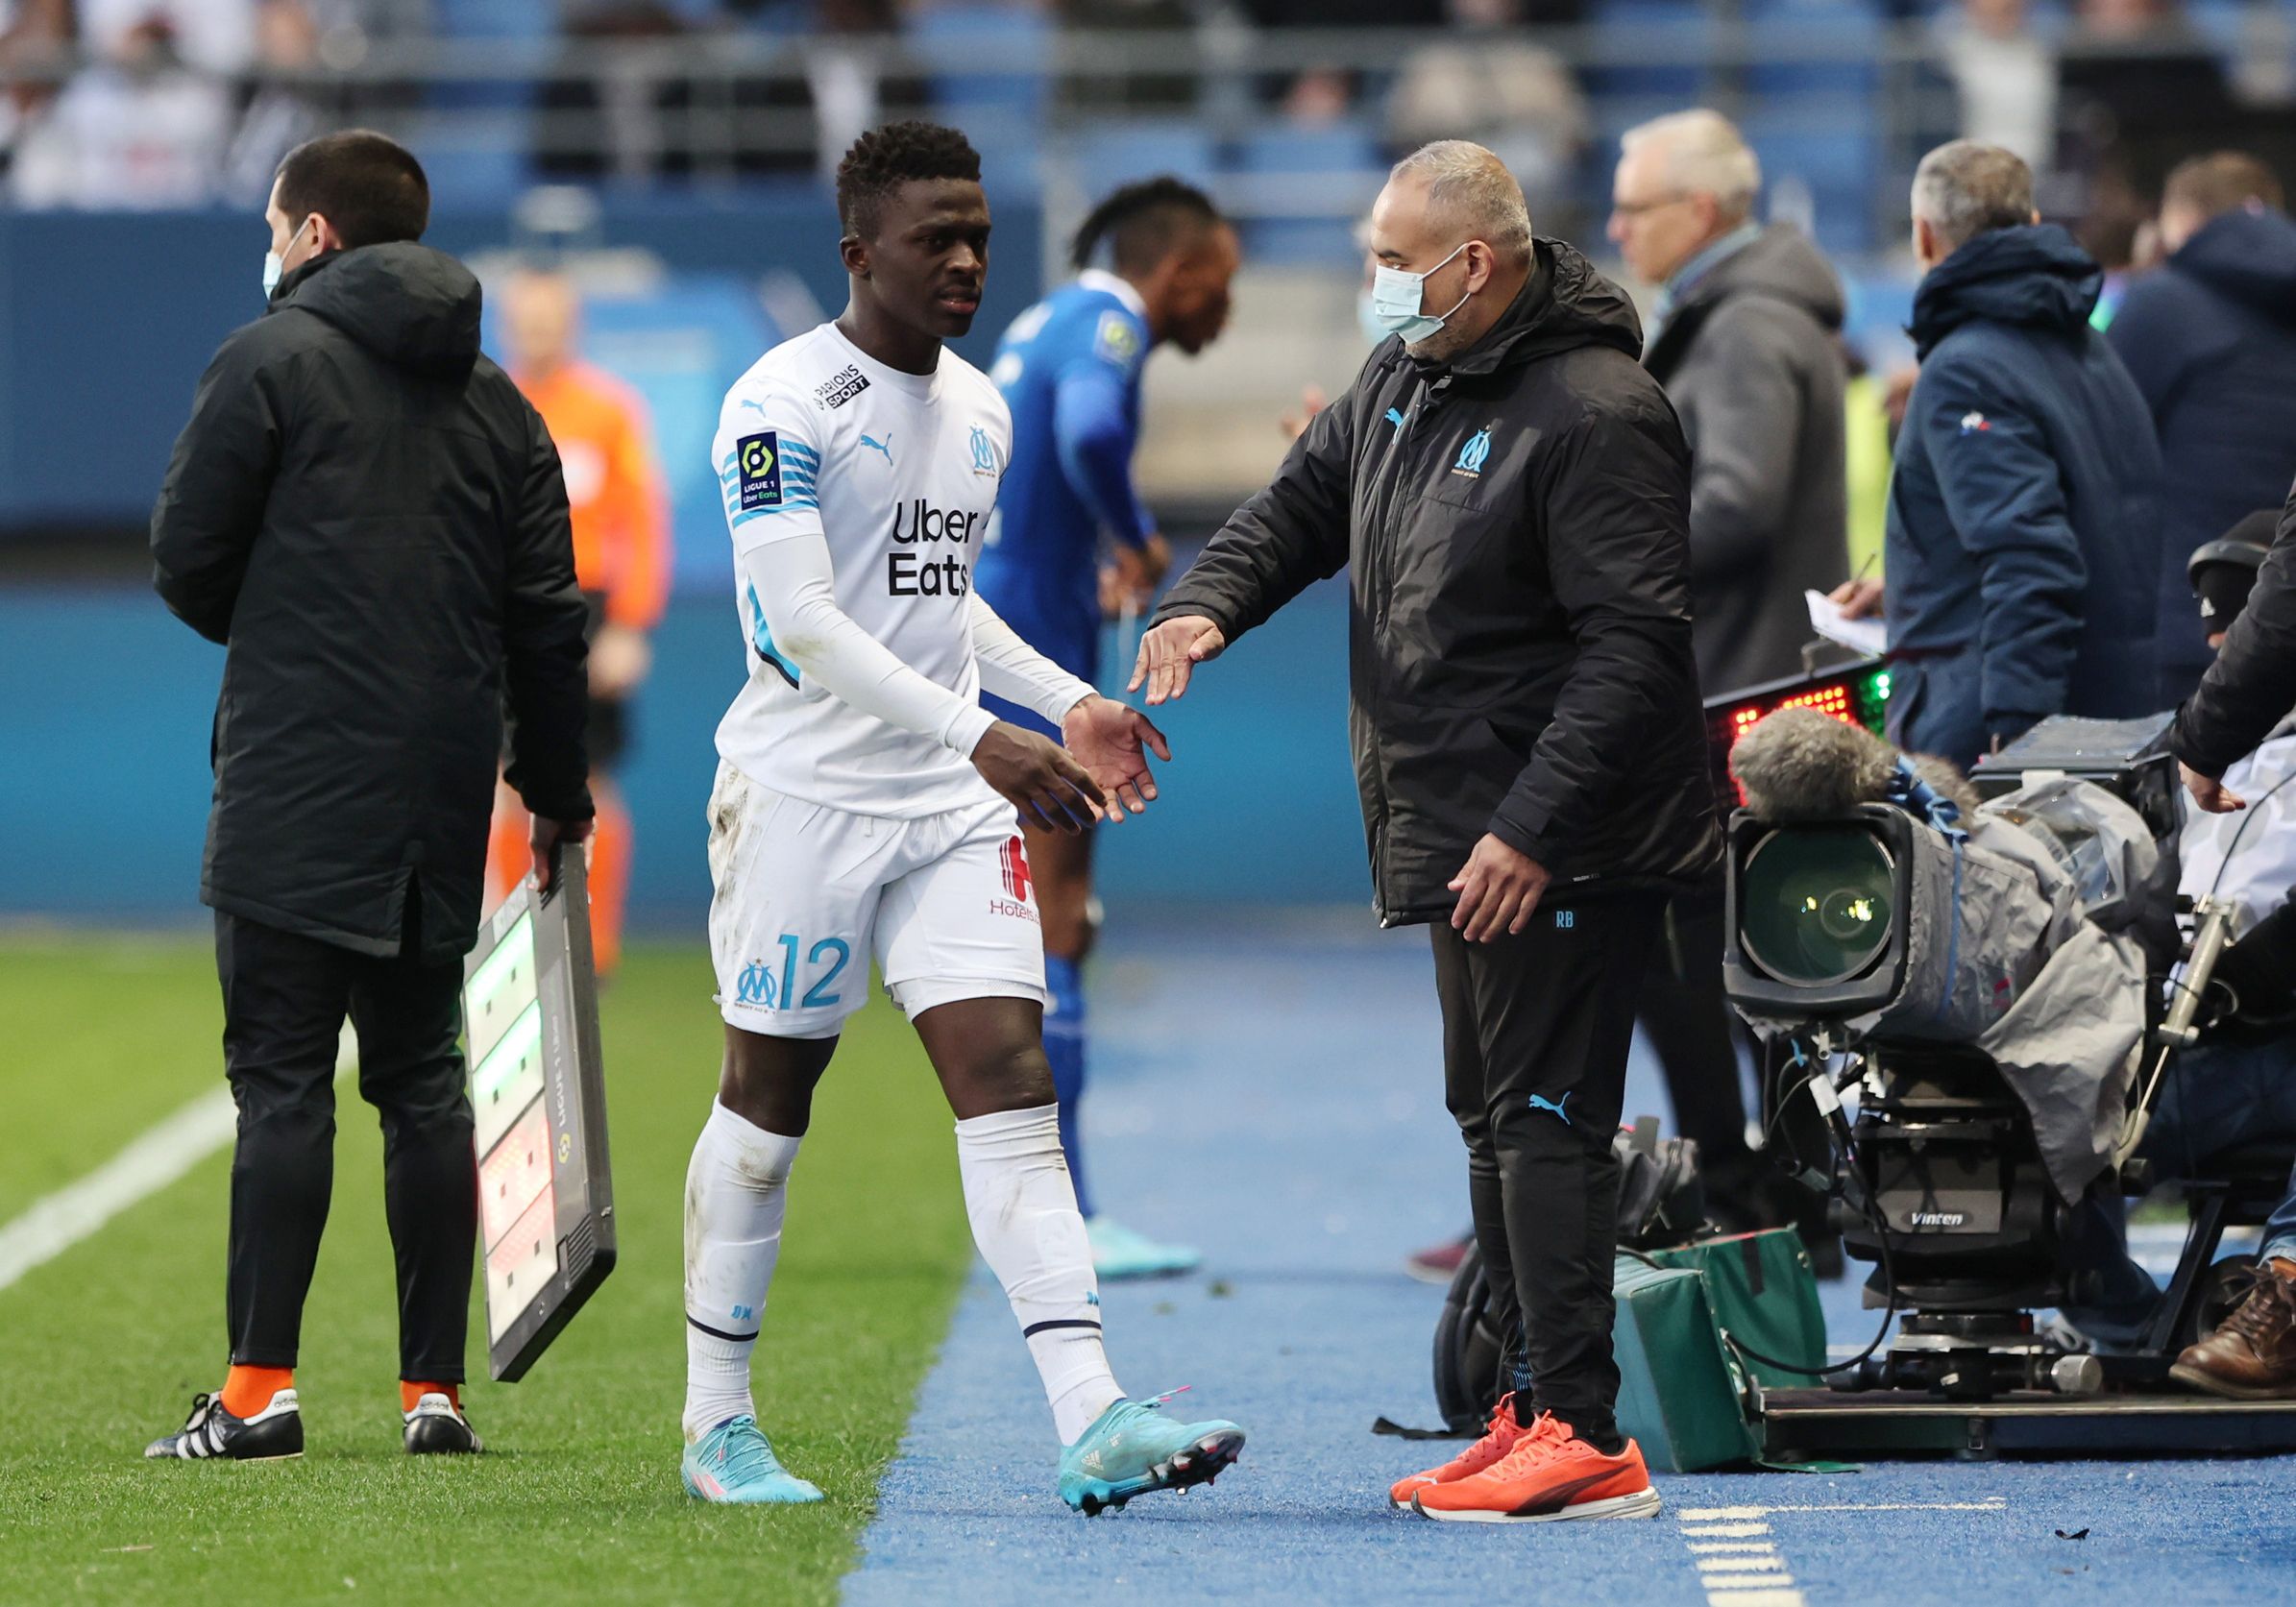 Marseille's Bamba Dieng walks off the pitch